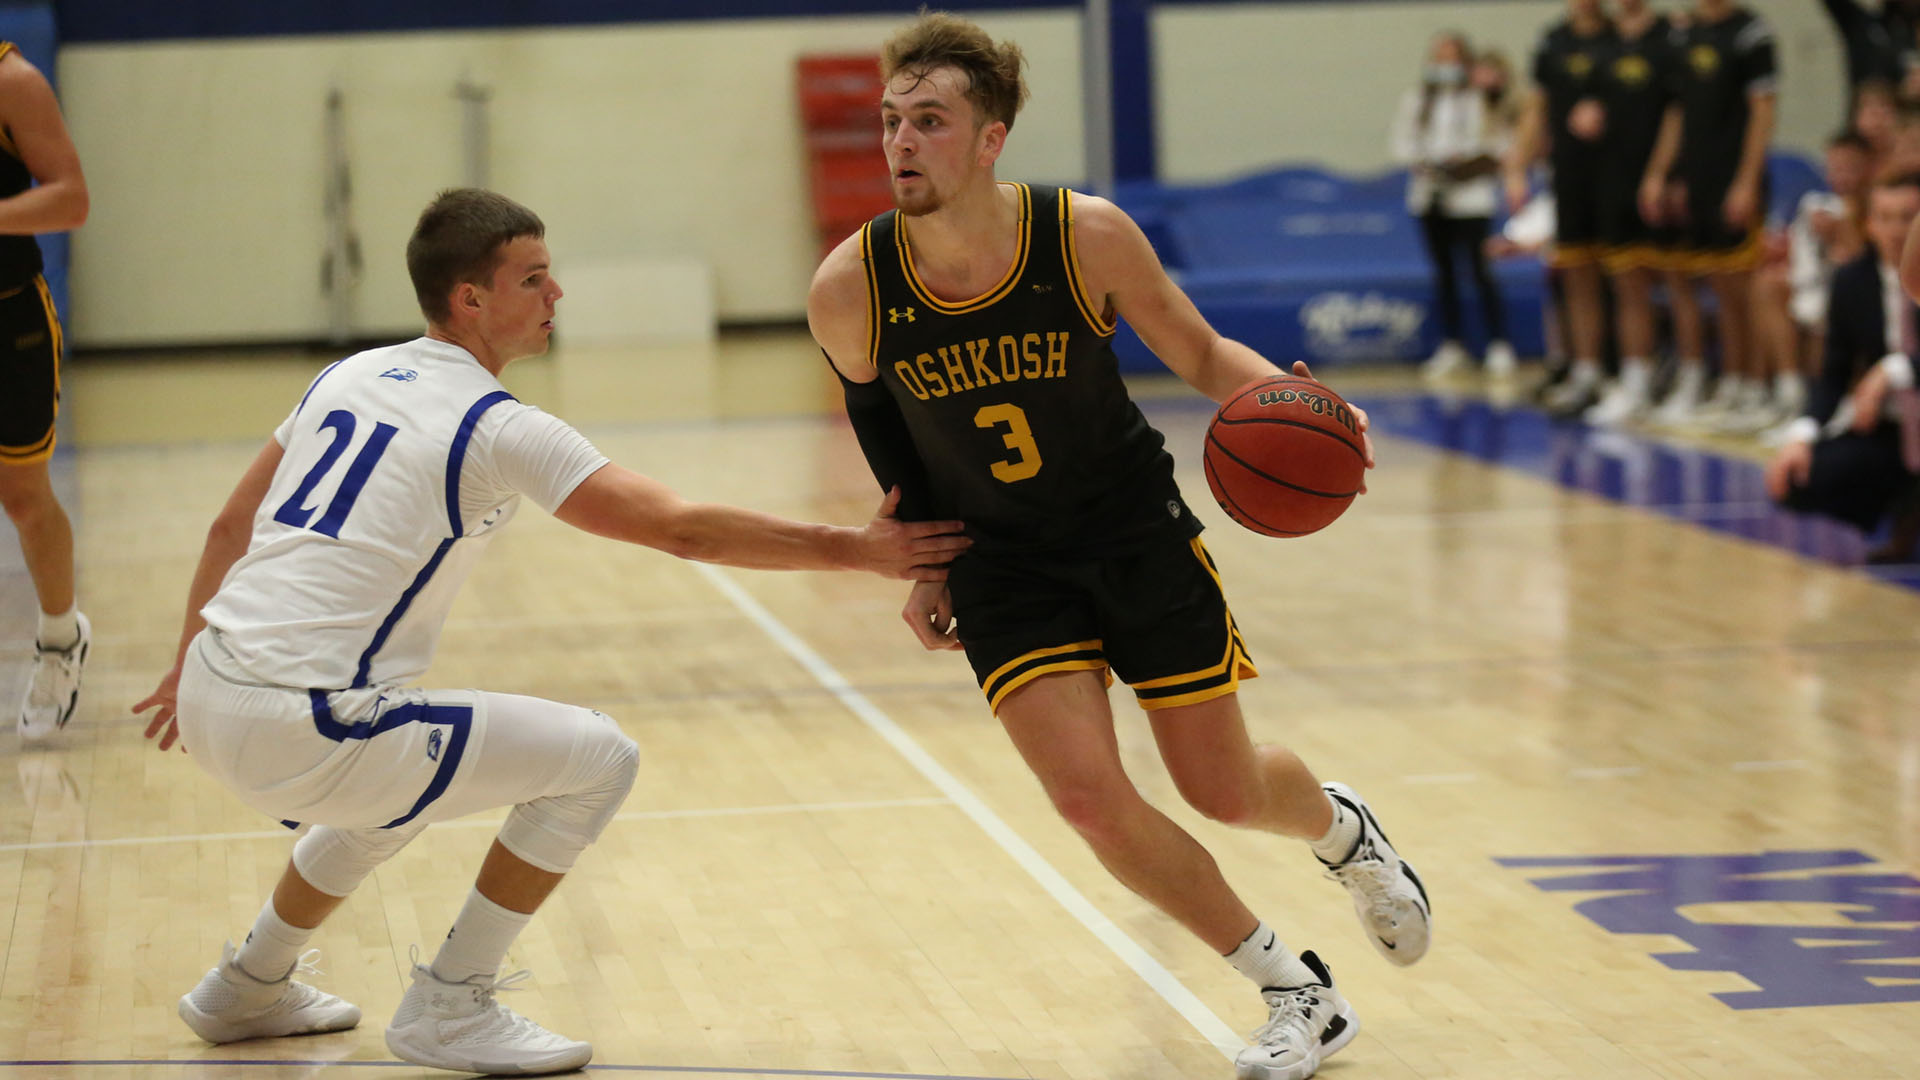 Eddie Muench scored 21 points against the Vikings, including five 3-point baskets in the first half.